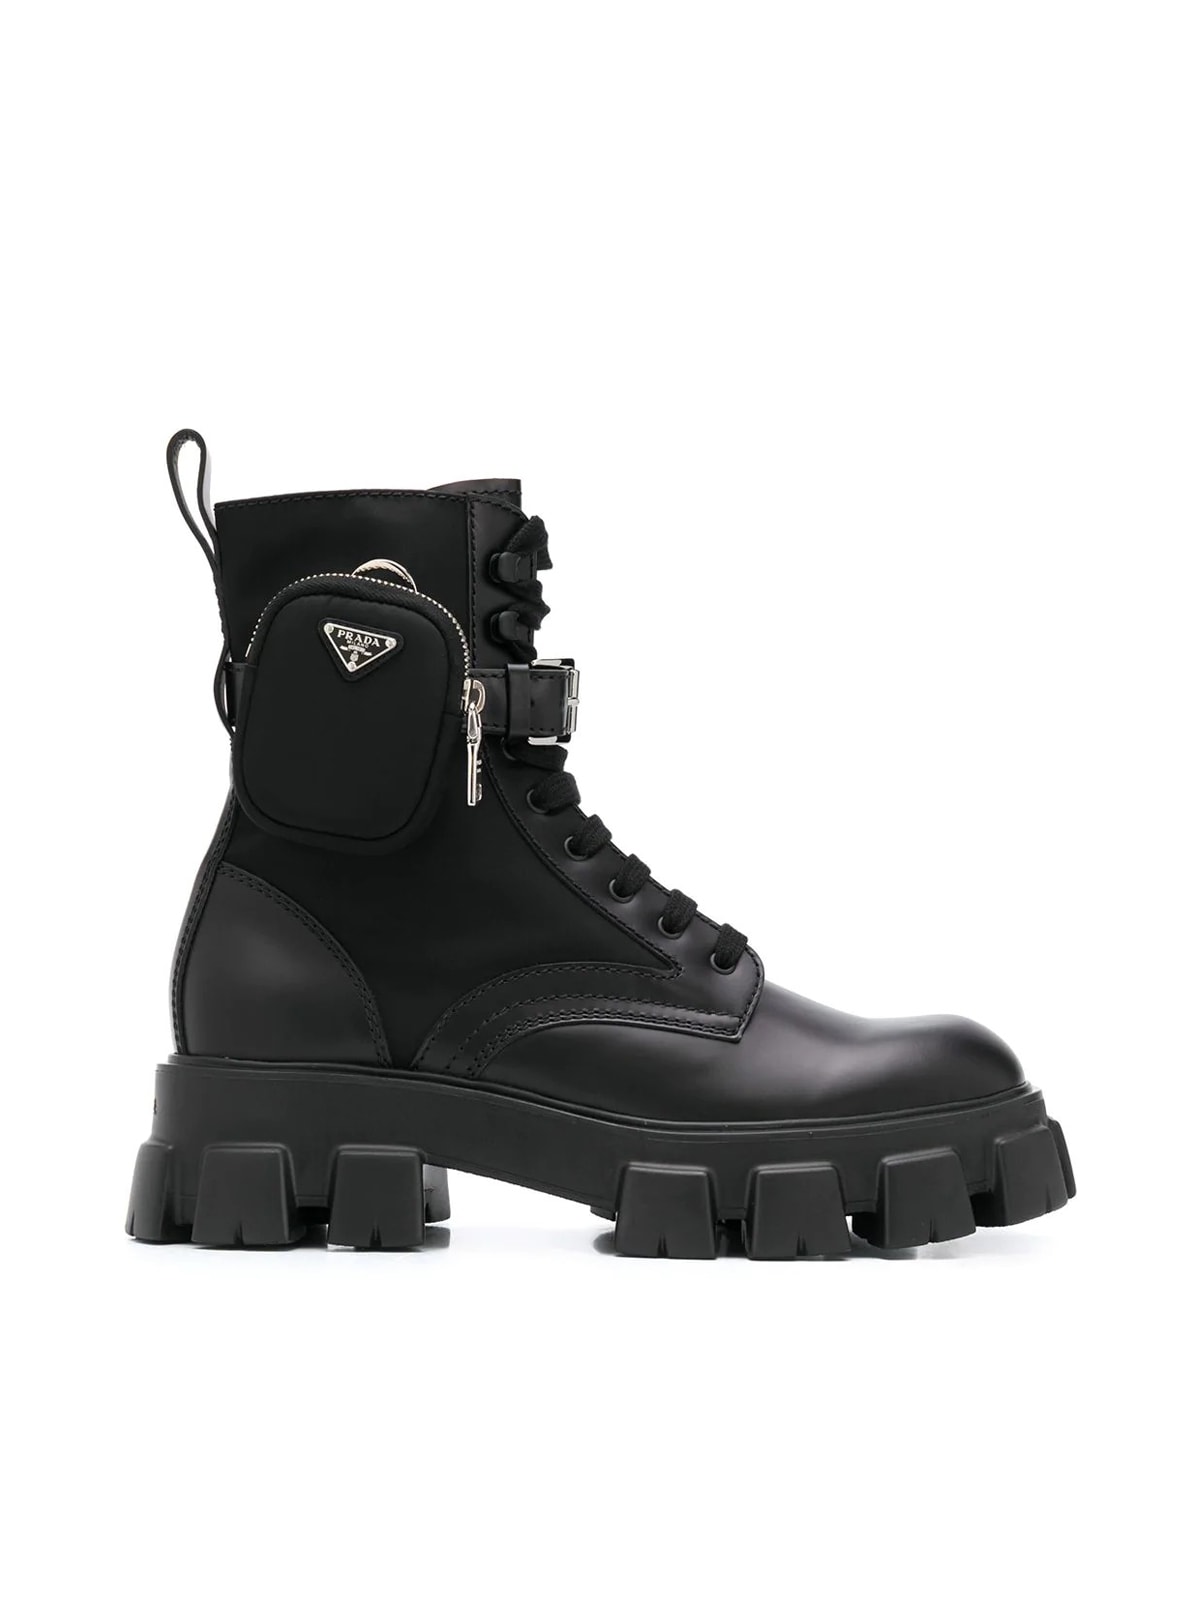 Prada Monolith Belted Boots